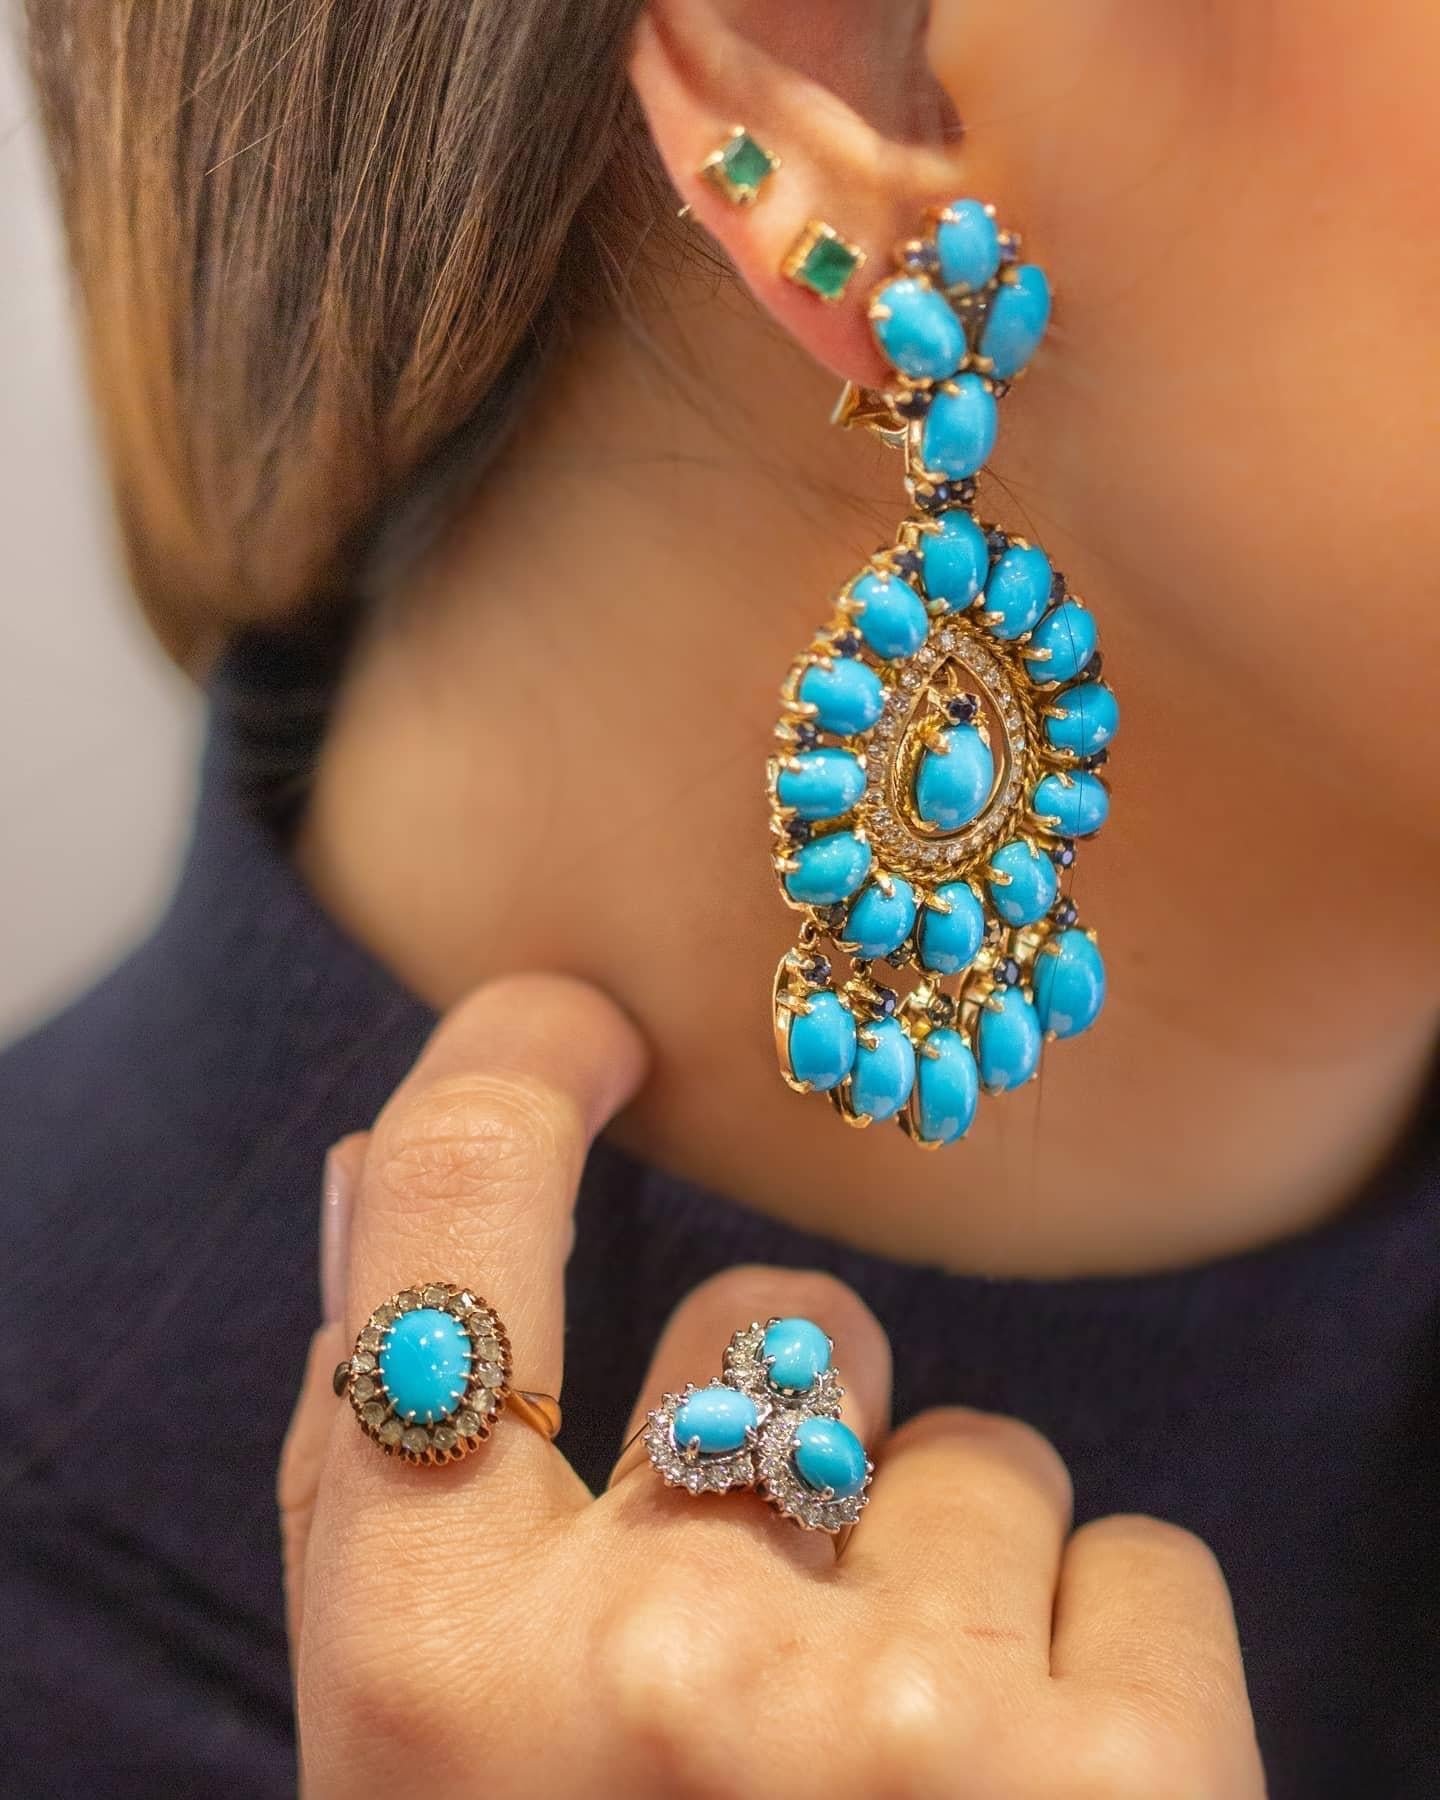 An Important Earrings mounted in yellow gold , set with numerous natural Persian Turquoise ( The most-prized turquoise color is an even, intense, medium blue, sometimes referred to as robin's egg blue or sky blue in the trade. The traditional source